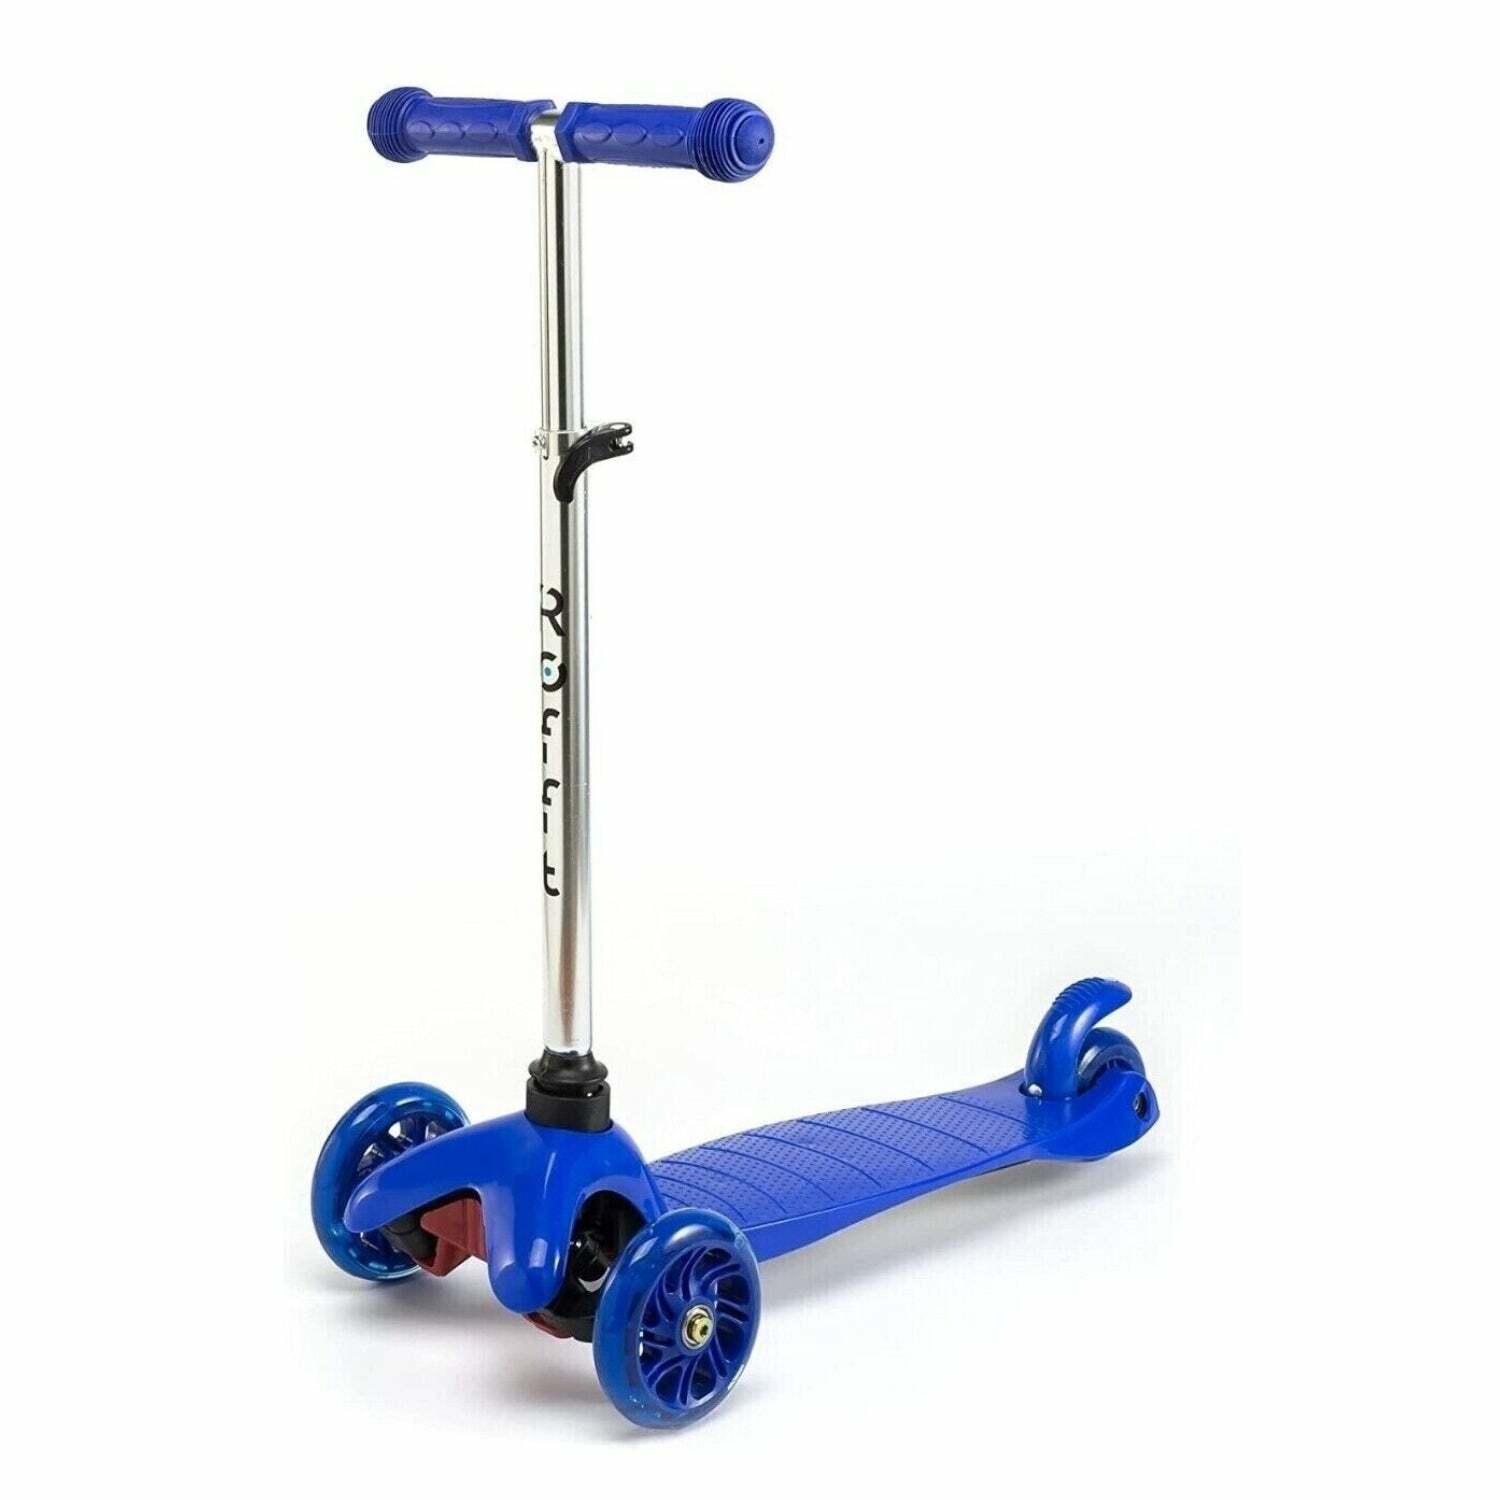 ROFFT - Kick Scooter, Lean-to-Steer LED 3 Wheel, Kids Ages 3-5 Blue